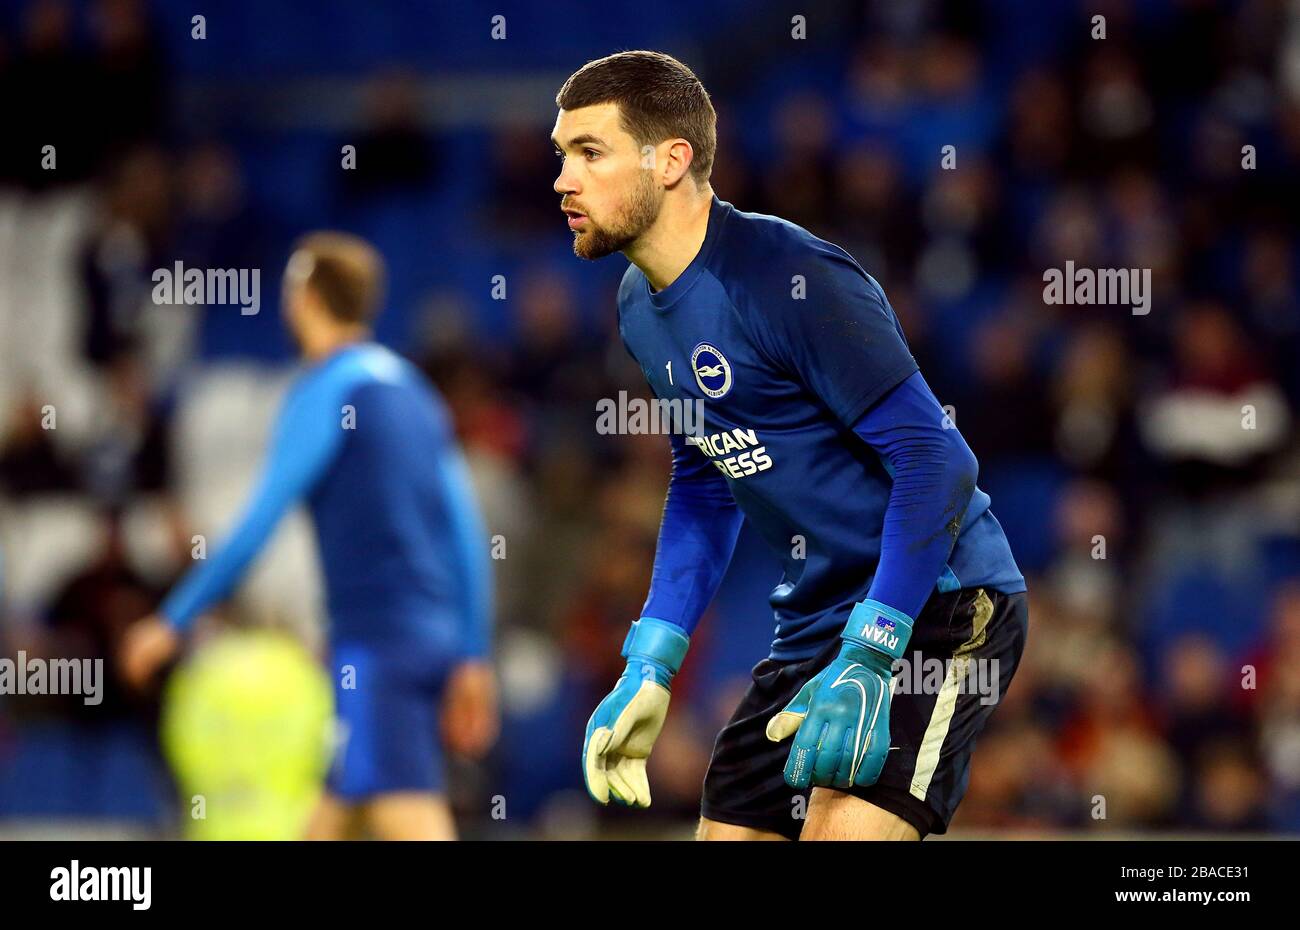 Brighton and Hove Albion goalkeeper Mathew Ryan warms up before the match Stock Photo